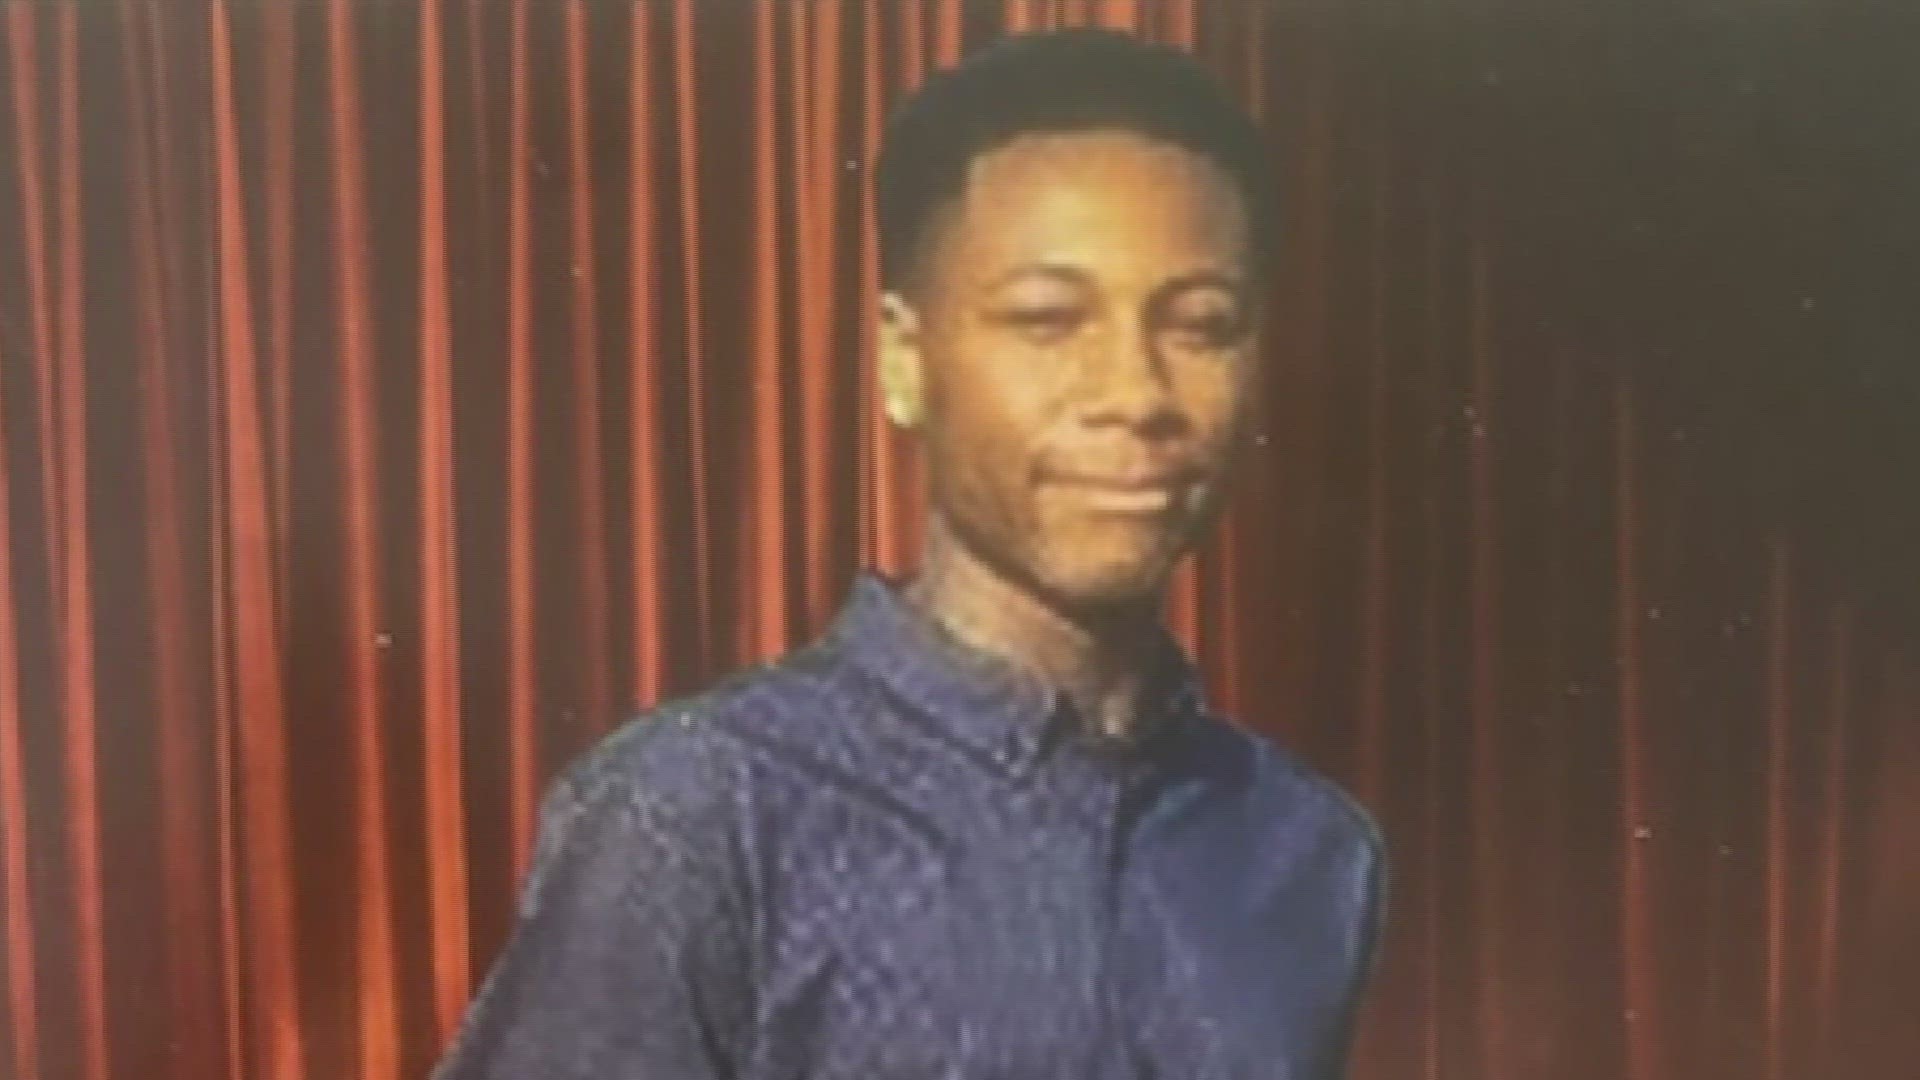 We're learning more about the kind of person 21-year-old Marcel Da'jon Wagner was before he was killed on a bus on Oct. 3.